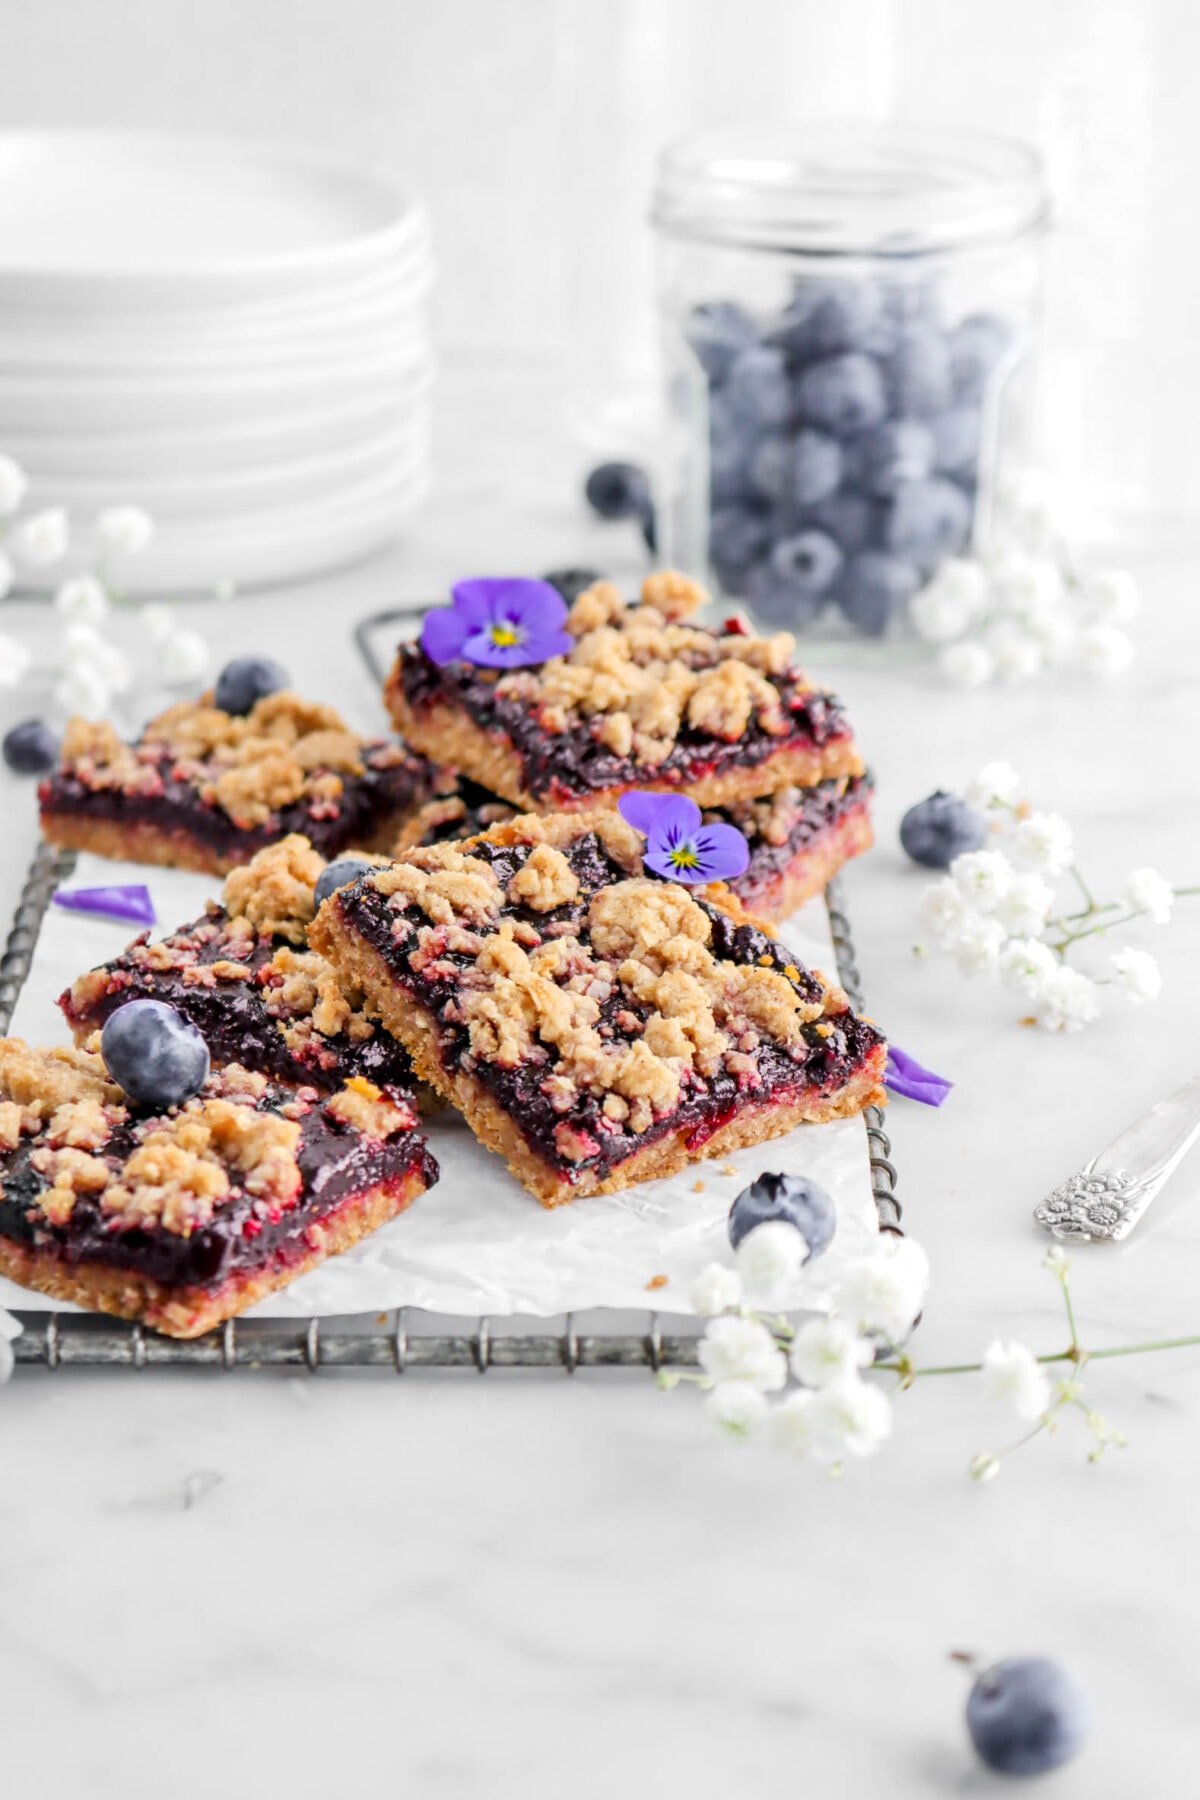 six blueberry crumble bars on parchment paper lined wire tray with blueberries and flowers around on marble surface.